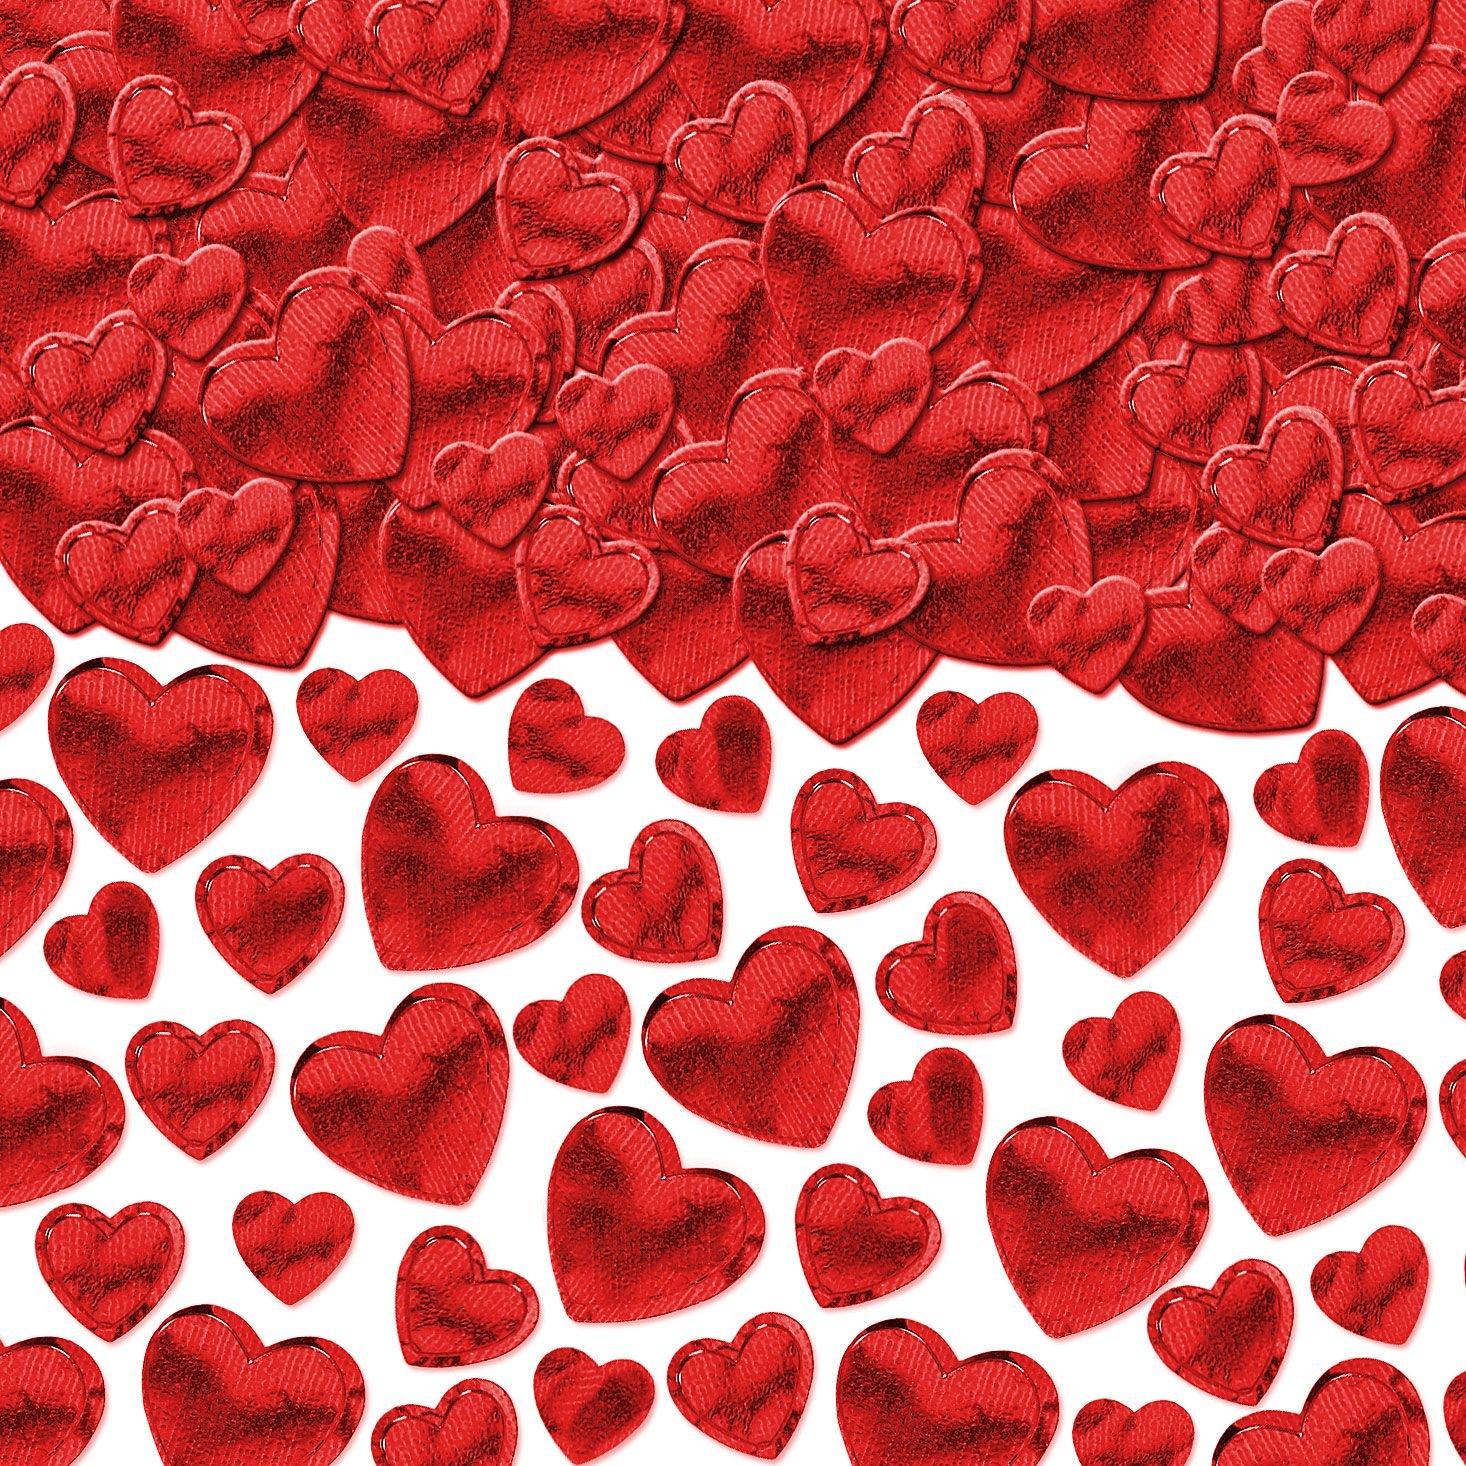 Red Confetti Hearts by the Pound in Bright Tissue and Metallics